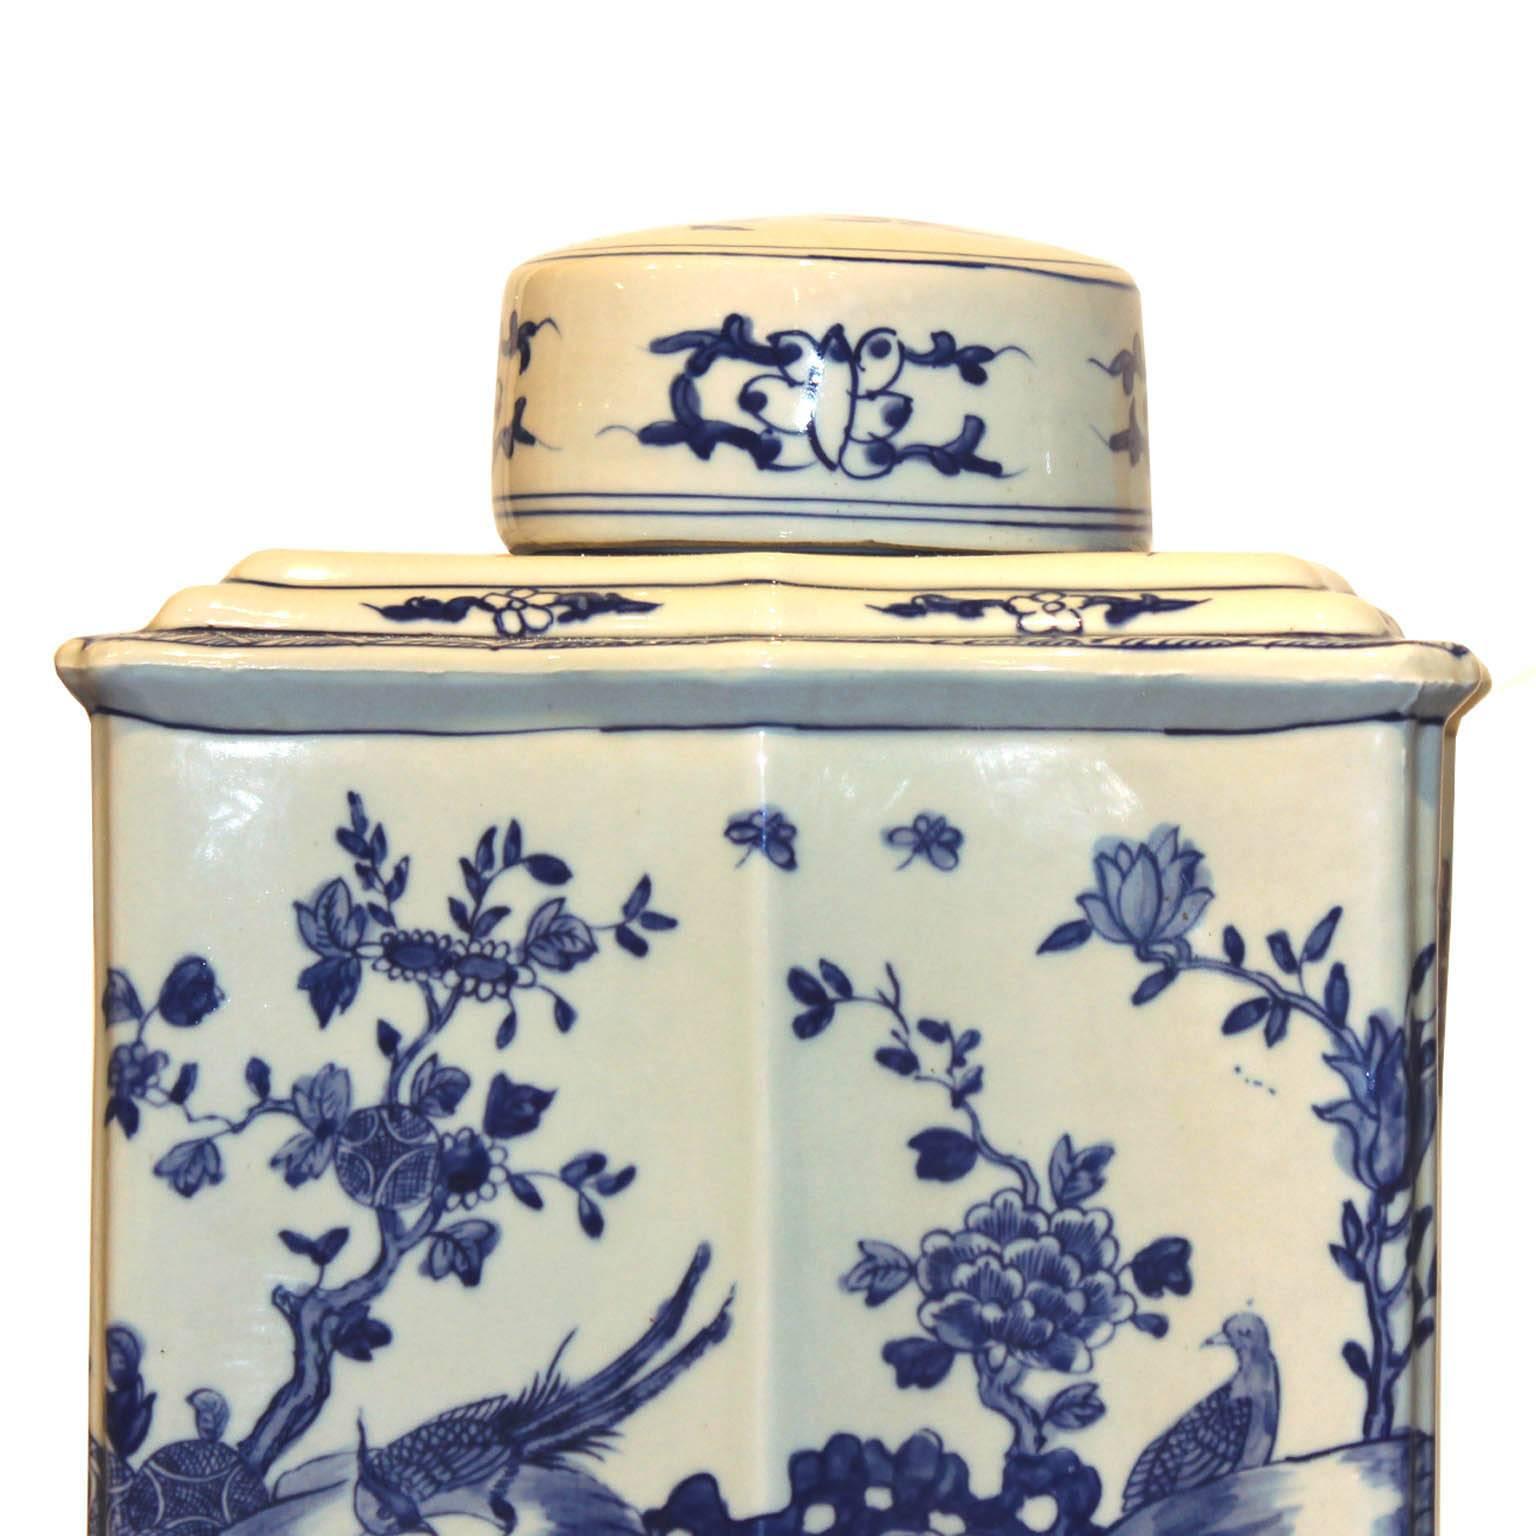 Elegant blue and white tea containers with hand-painted birds perched on cherry branches can be displayed on a bookshelf or console table. Available individually at $525 each.